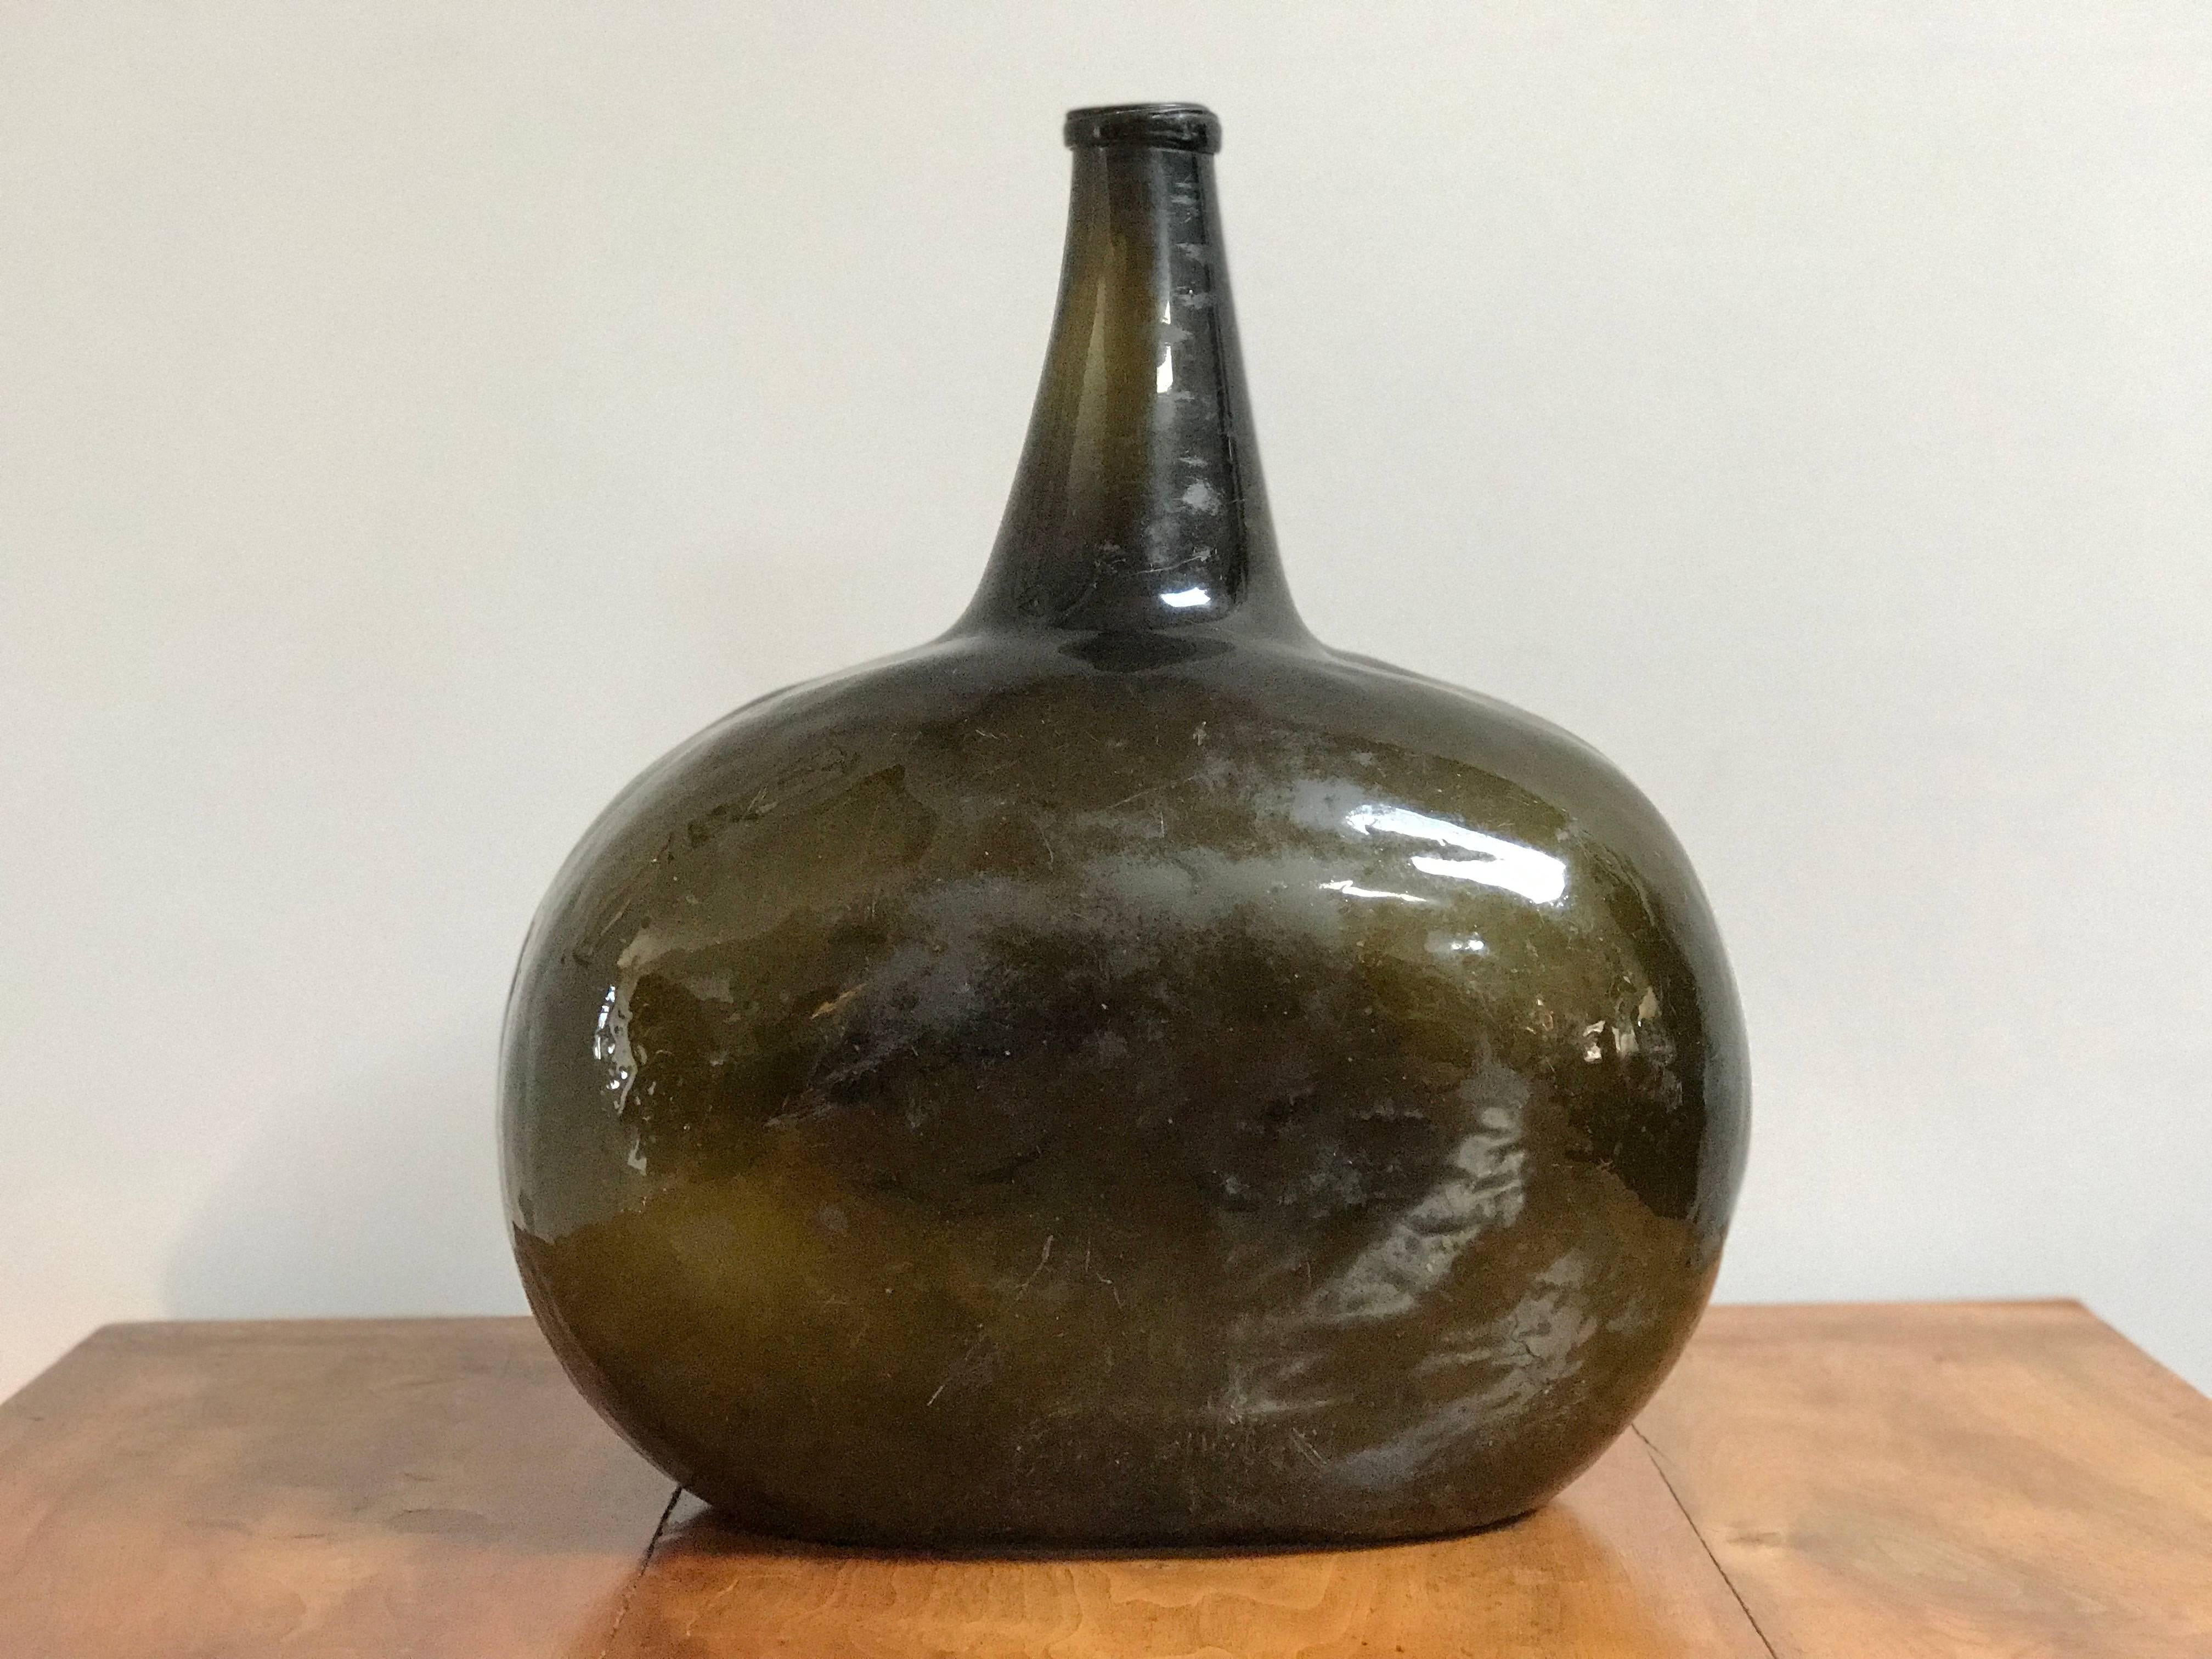 19th-century spherical blown-glass bottle from France. The color is an exceptionally rich olive hue. The rustic shape and texture give this bottle a French country charm. Could work as a decorative object in its own right, or as a vase. 

France,